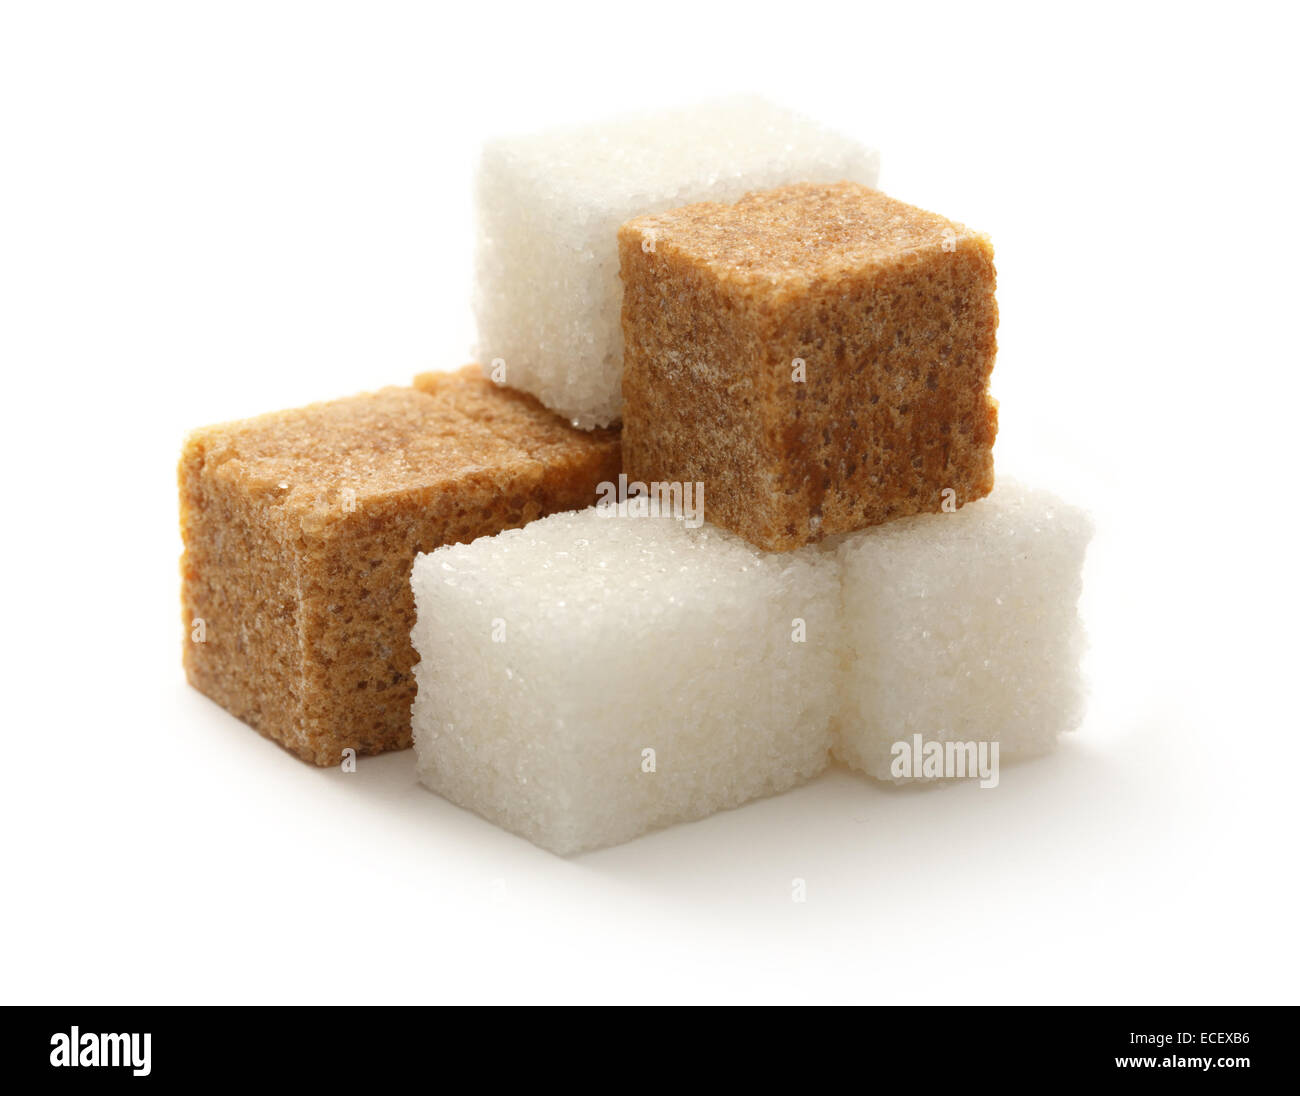 Cane and white sugar cubes Stock Photo